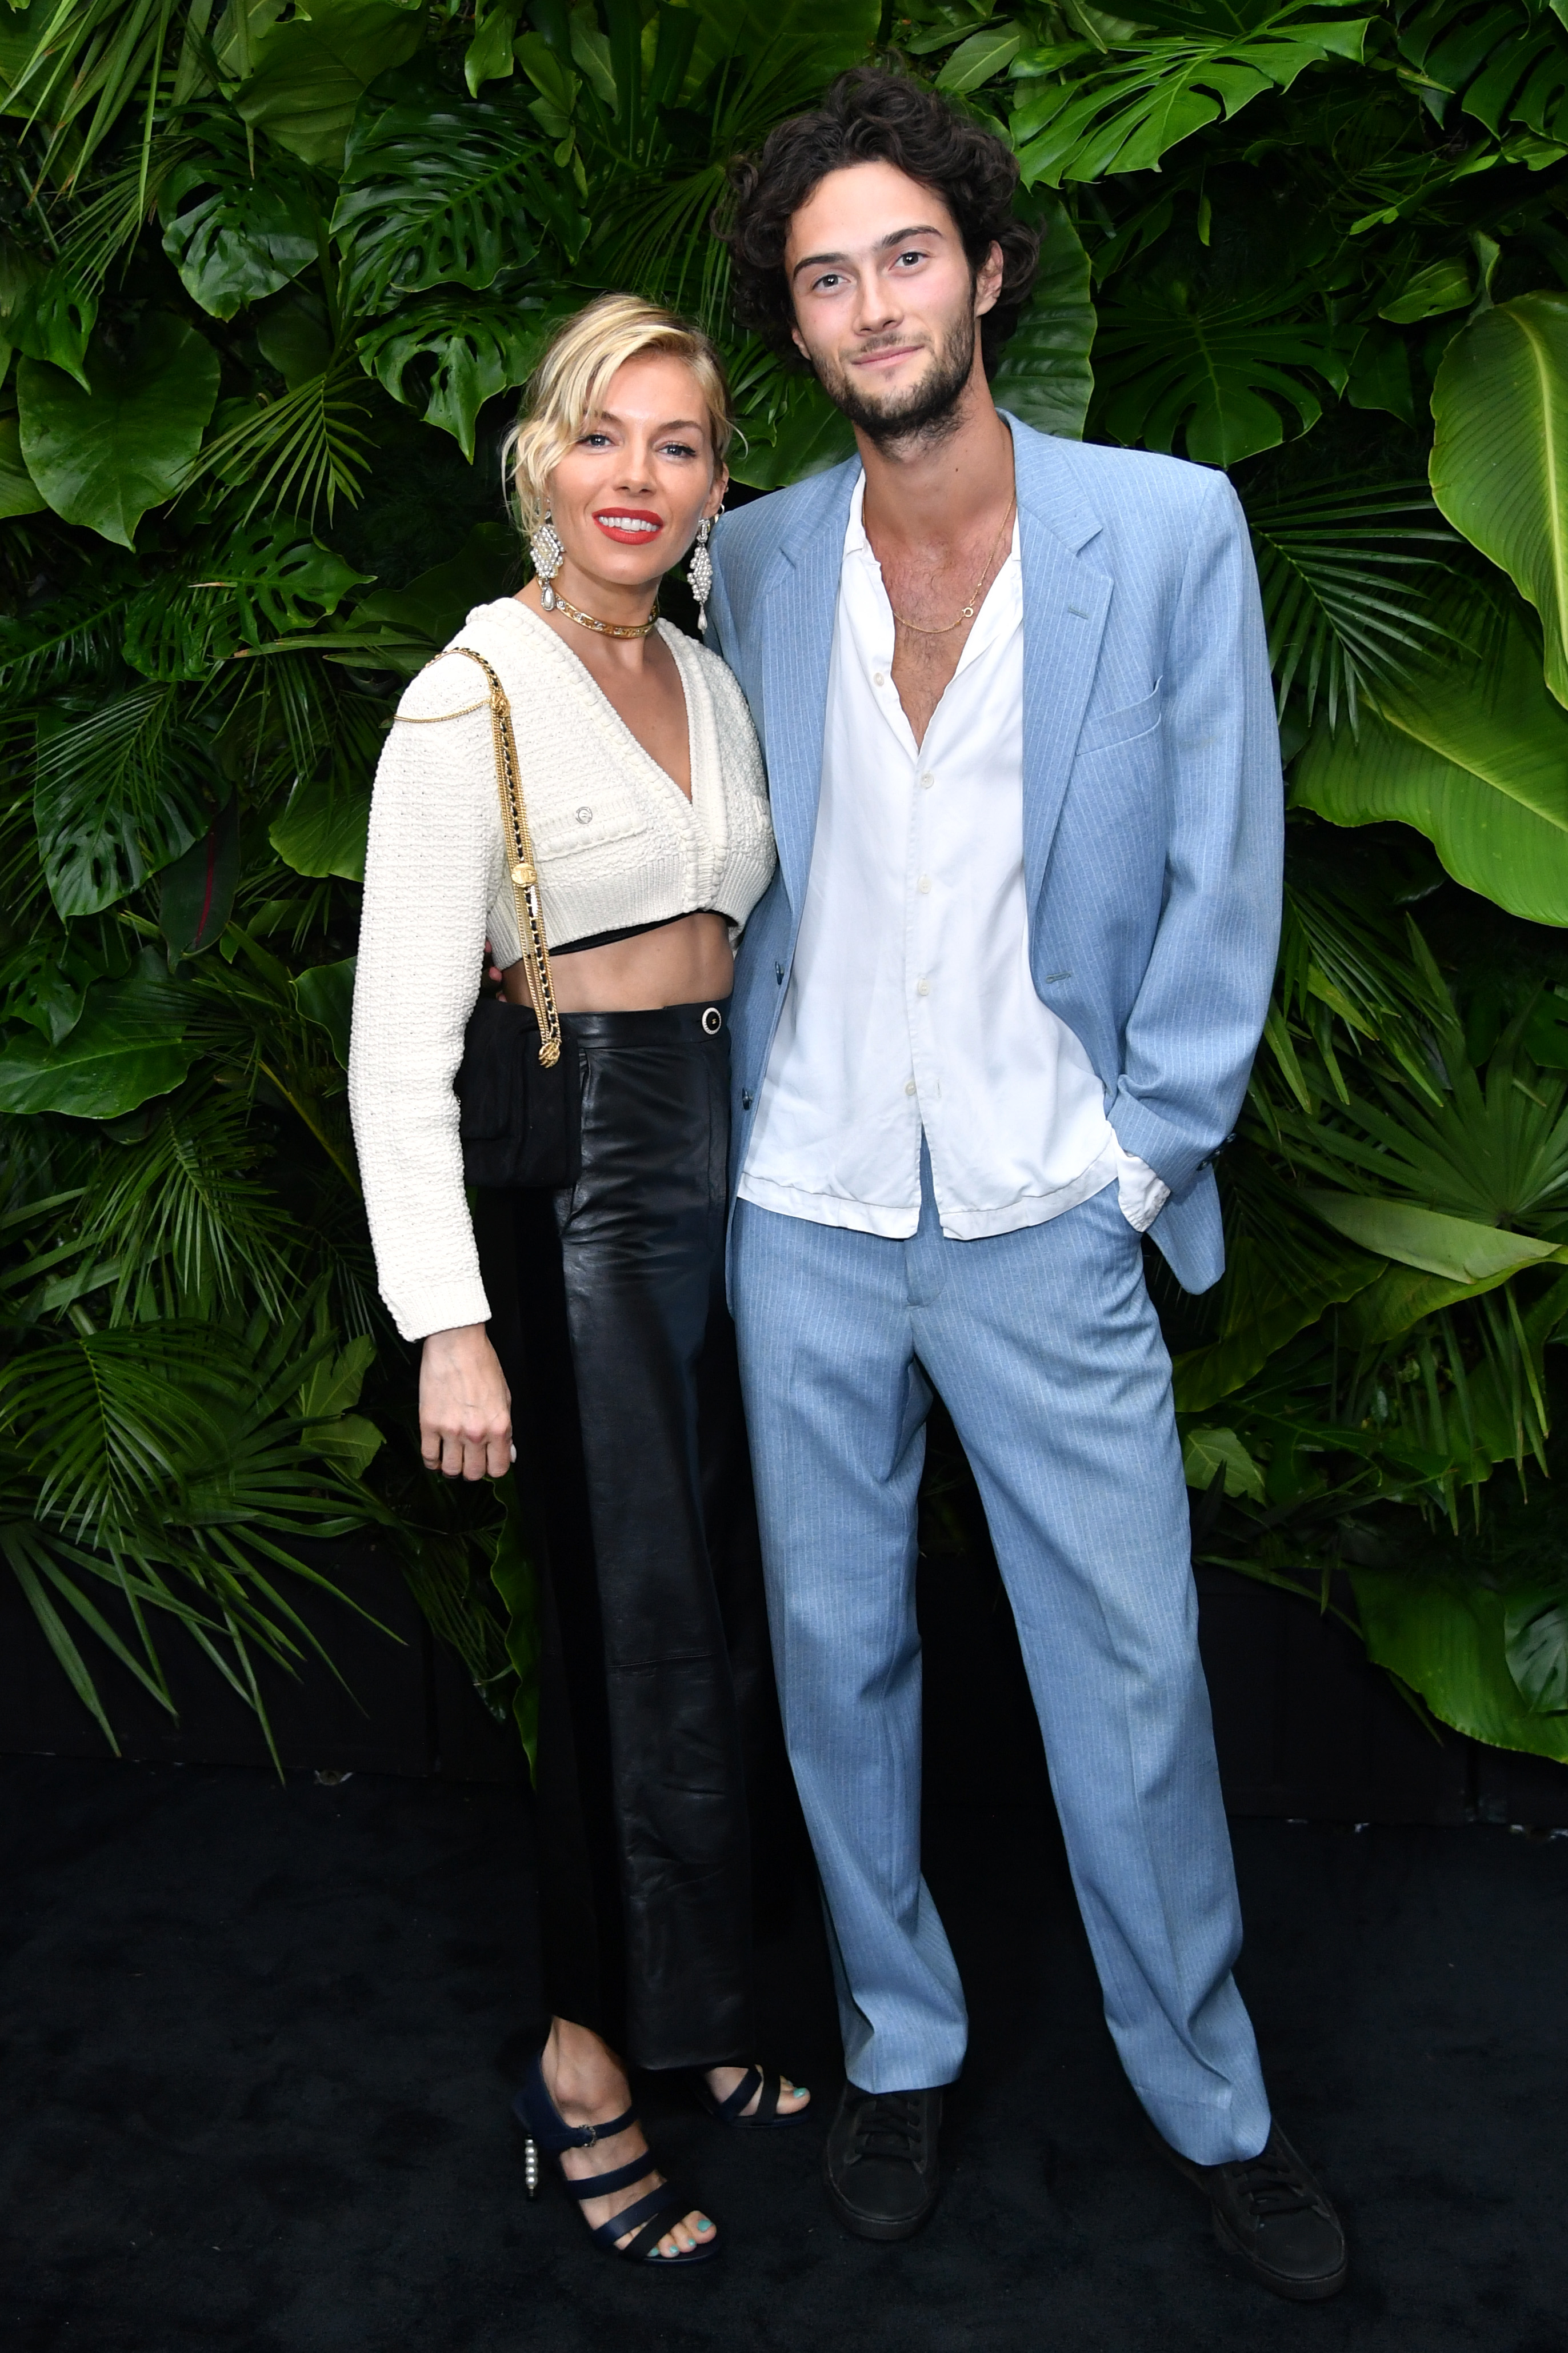 <p>In February 2022, "American Sniper" actress Sienna Miller, then 40, stepped out <a href="https://www.wonderwall.com/celebrity/couples/tk-plus-more-celeb-love-news-554241.gallery?photoId=554815">on a date night</a> in New York City with Oli Green — a model and actor 15 years her junior. In August 2023, the British beauty -- whose romance with Oli has continued -- revealed that she's pregnant with her second child, <a href="https://people.com/sienna-miller-is-pregnant-expecting-second-baby-photos-exclusive-7563810">People</a> magazine confirmed. (Sienna is already a mom to a daughter with actor ex Tom Sturridge.)</p><p>Oli -- who's worked as a model for Gap and Burberry and appeared on "The Bold and the Beautiful" and on the Apple TV+ series "The Mosquito Coast" -- isn't the first younger man Sienna has dated. In 2020, she was <a href="https://www.wonderwall.com/celebrity/couples/lady-gaga-new-boyfriend-revealed-dating-celeb-love-life-news-early-february-2020-hollywood-romance-report-3022181.gallery?photoId=1071624">rumored to be engaged</a> to book editor Lucas Zwirner, who's about a decade younger than her.</p>